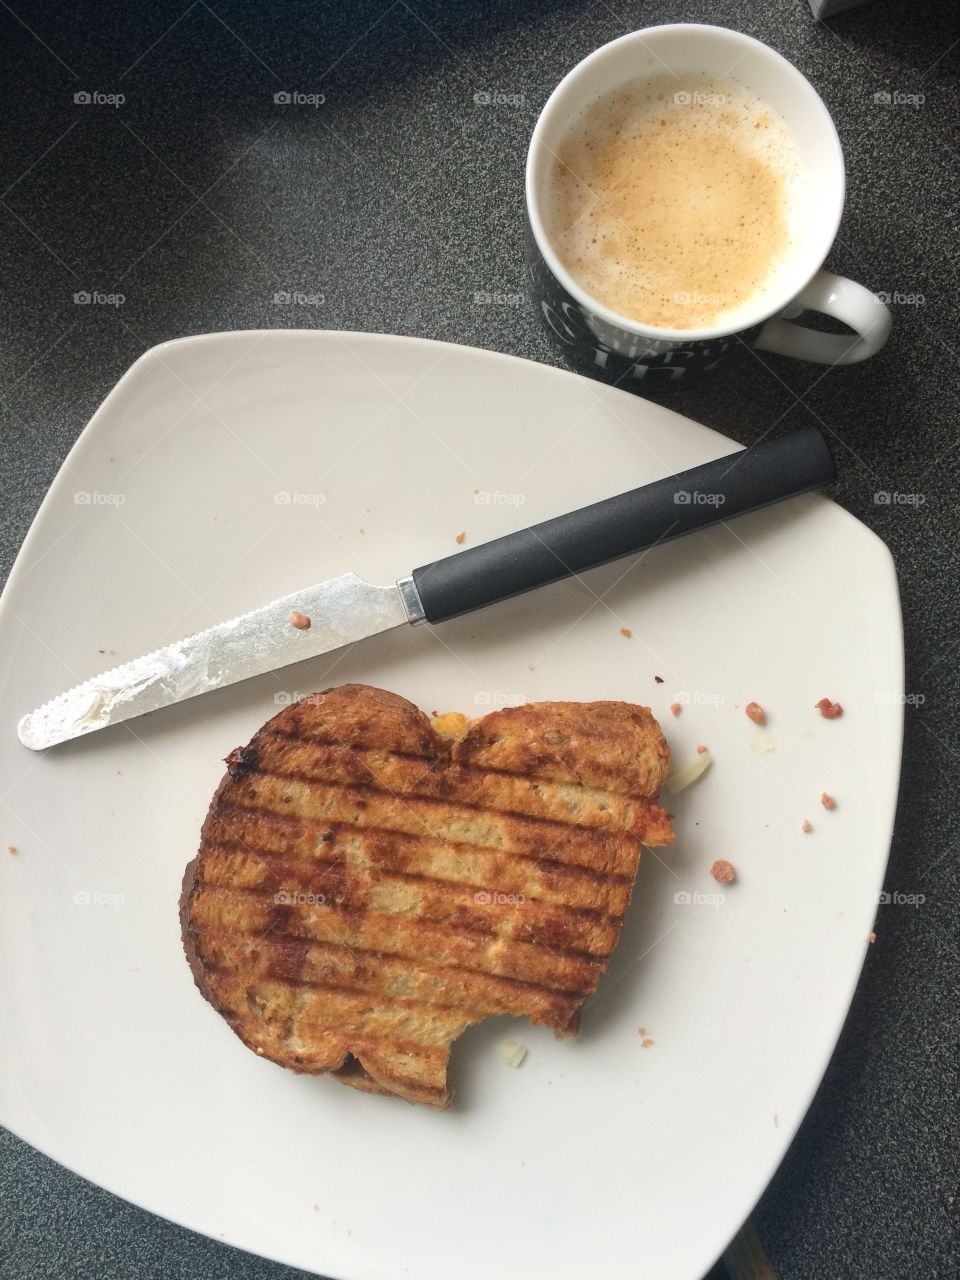 My English Sunday breakfast/brunch panini toasted grilled sandwich with espresso Cappuccino. 